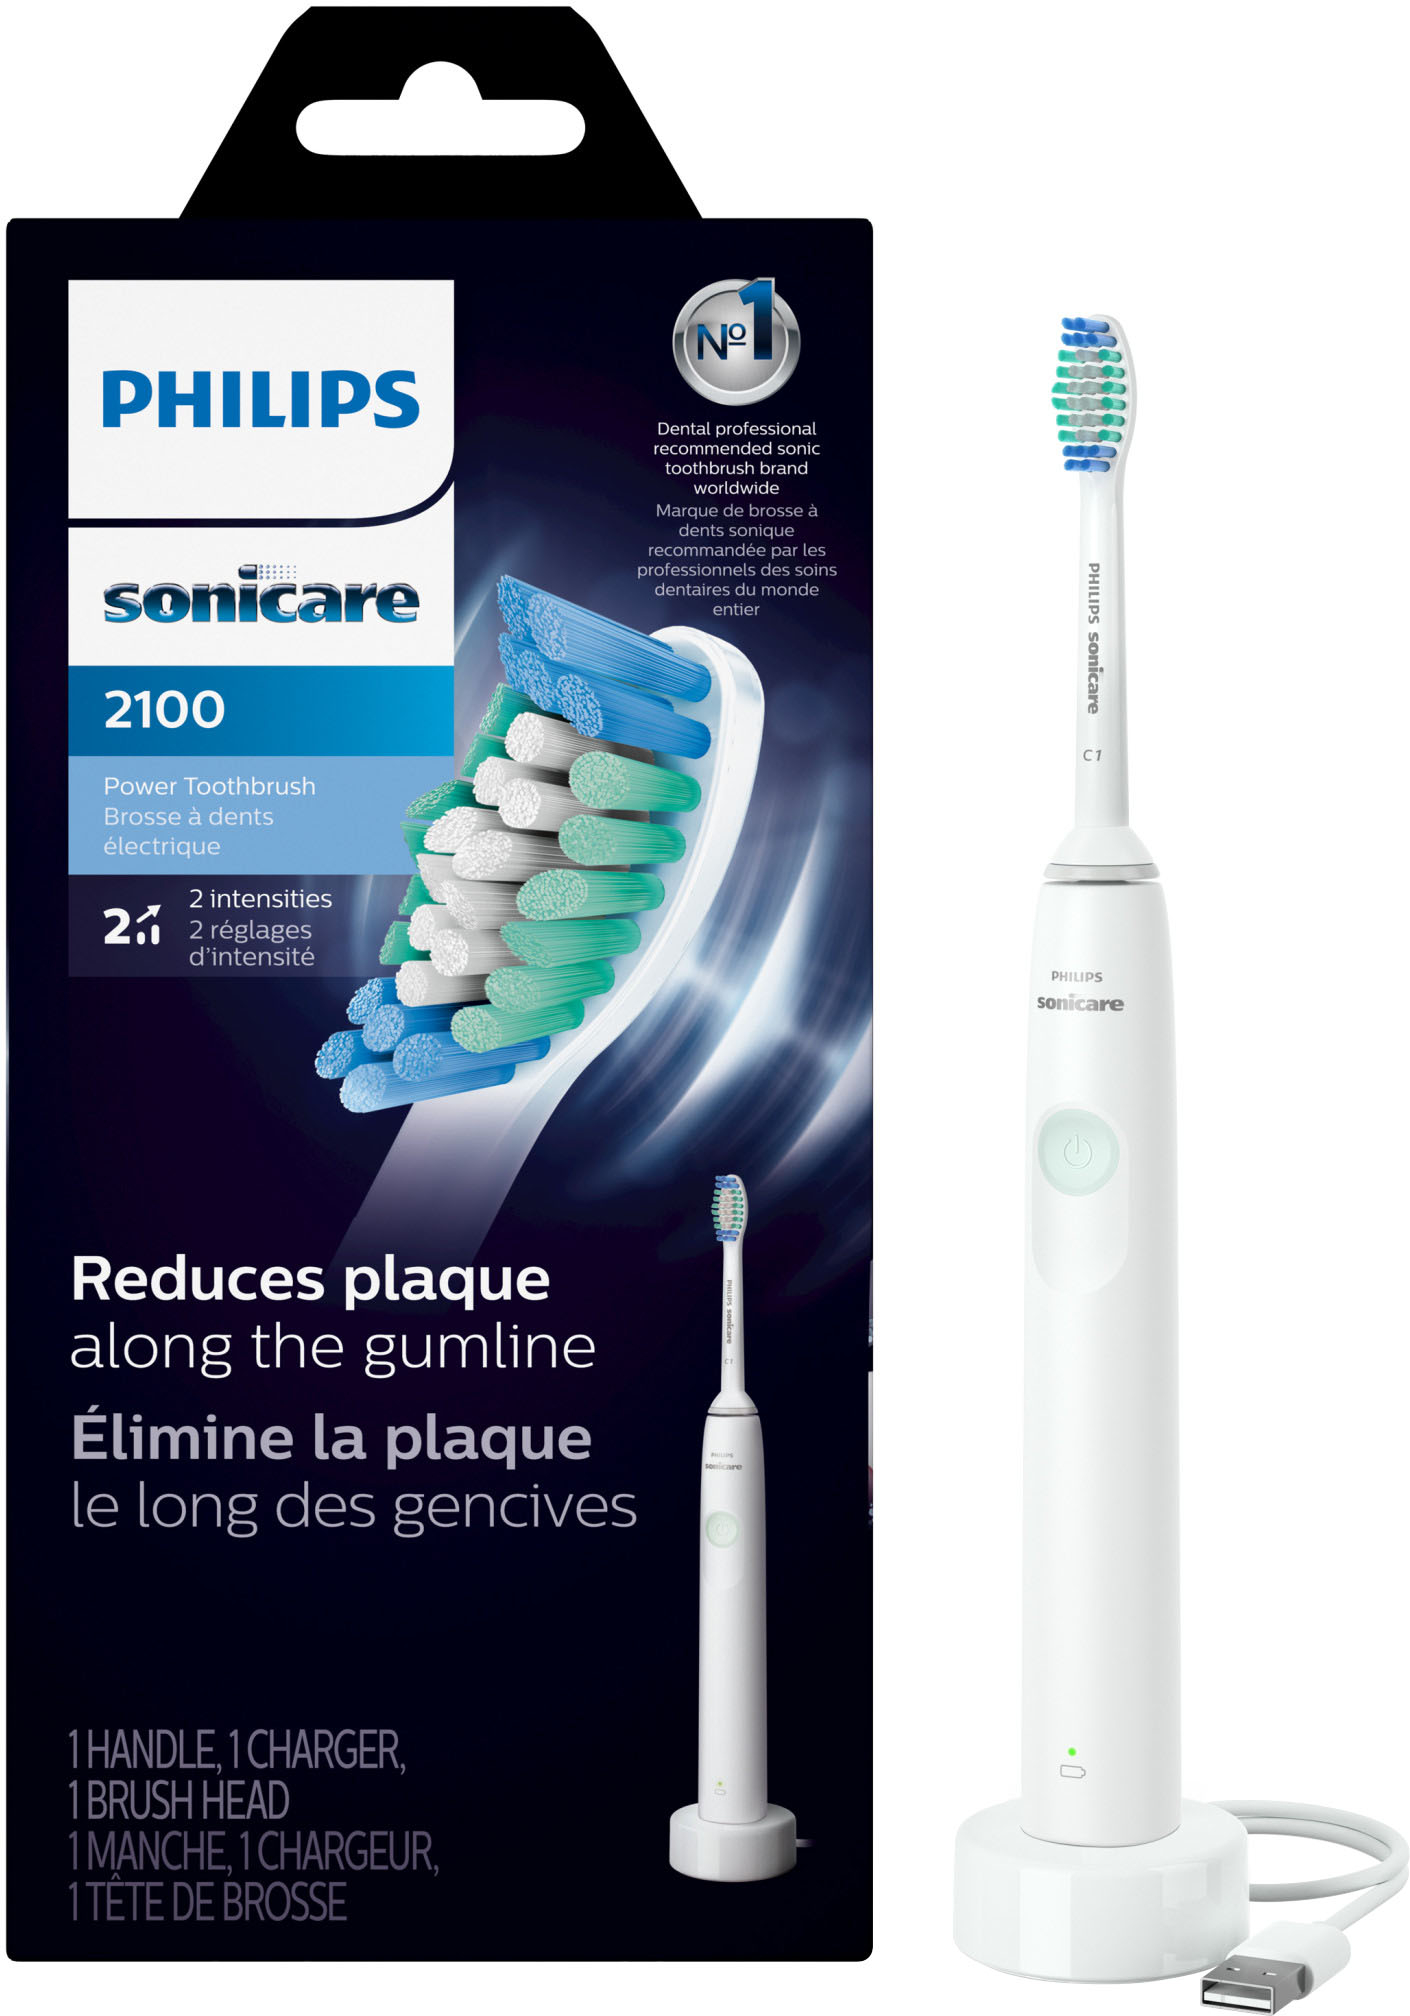 Philips Sonicare 2100 Power Toothbrush, Rechargeable Electric Toothbrush  White Mint HX3661/04 - Best Buy